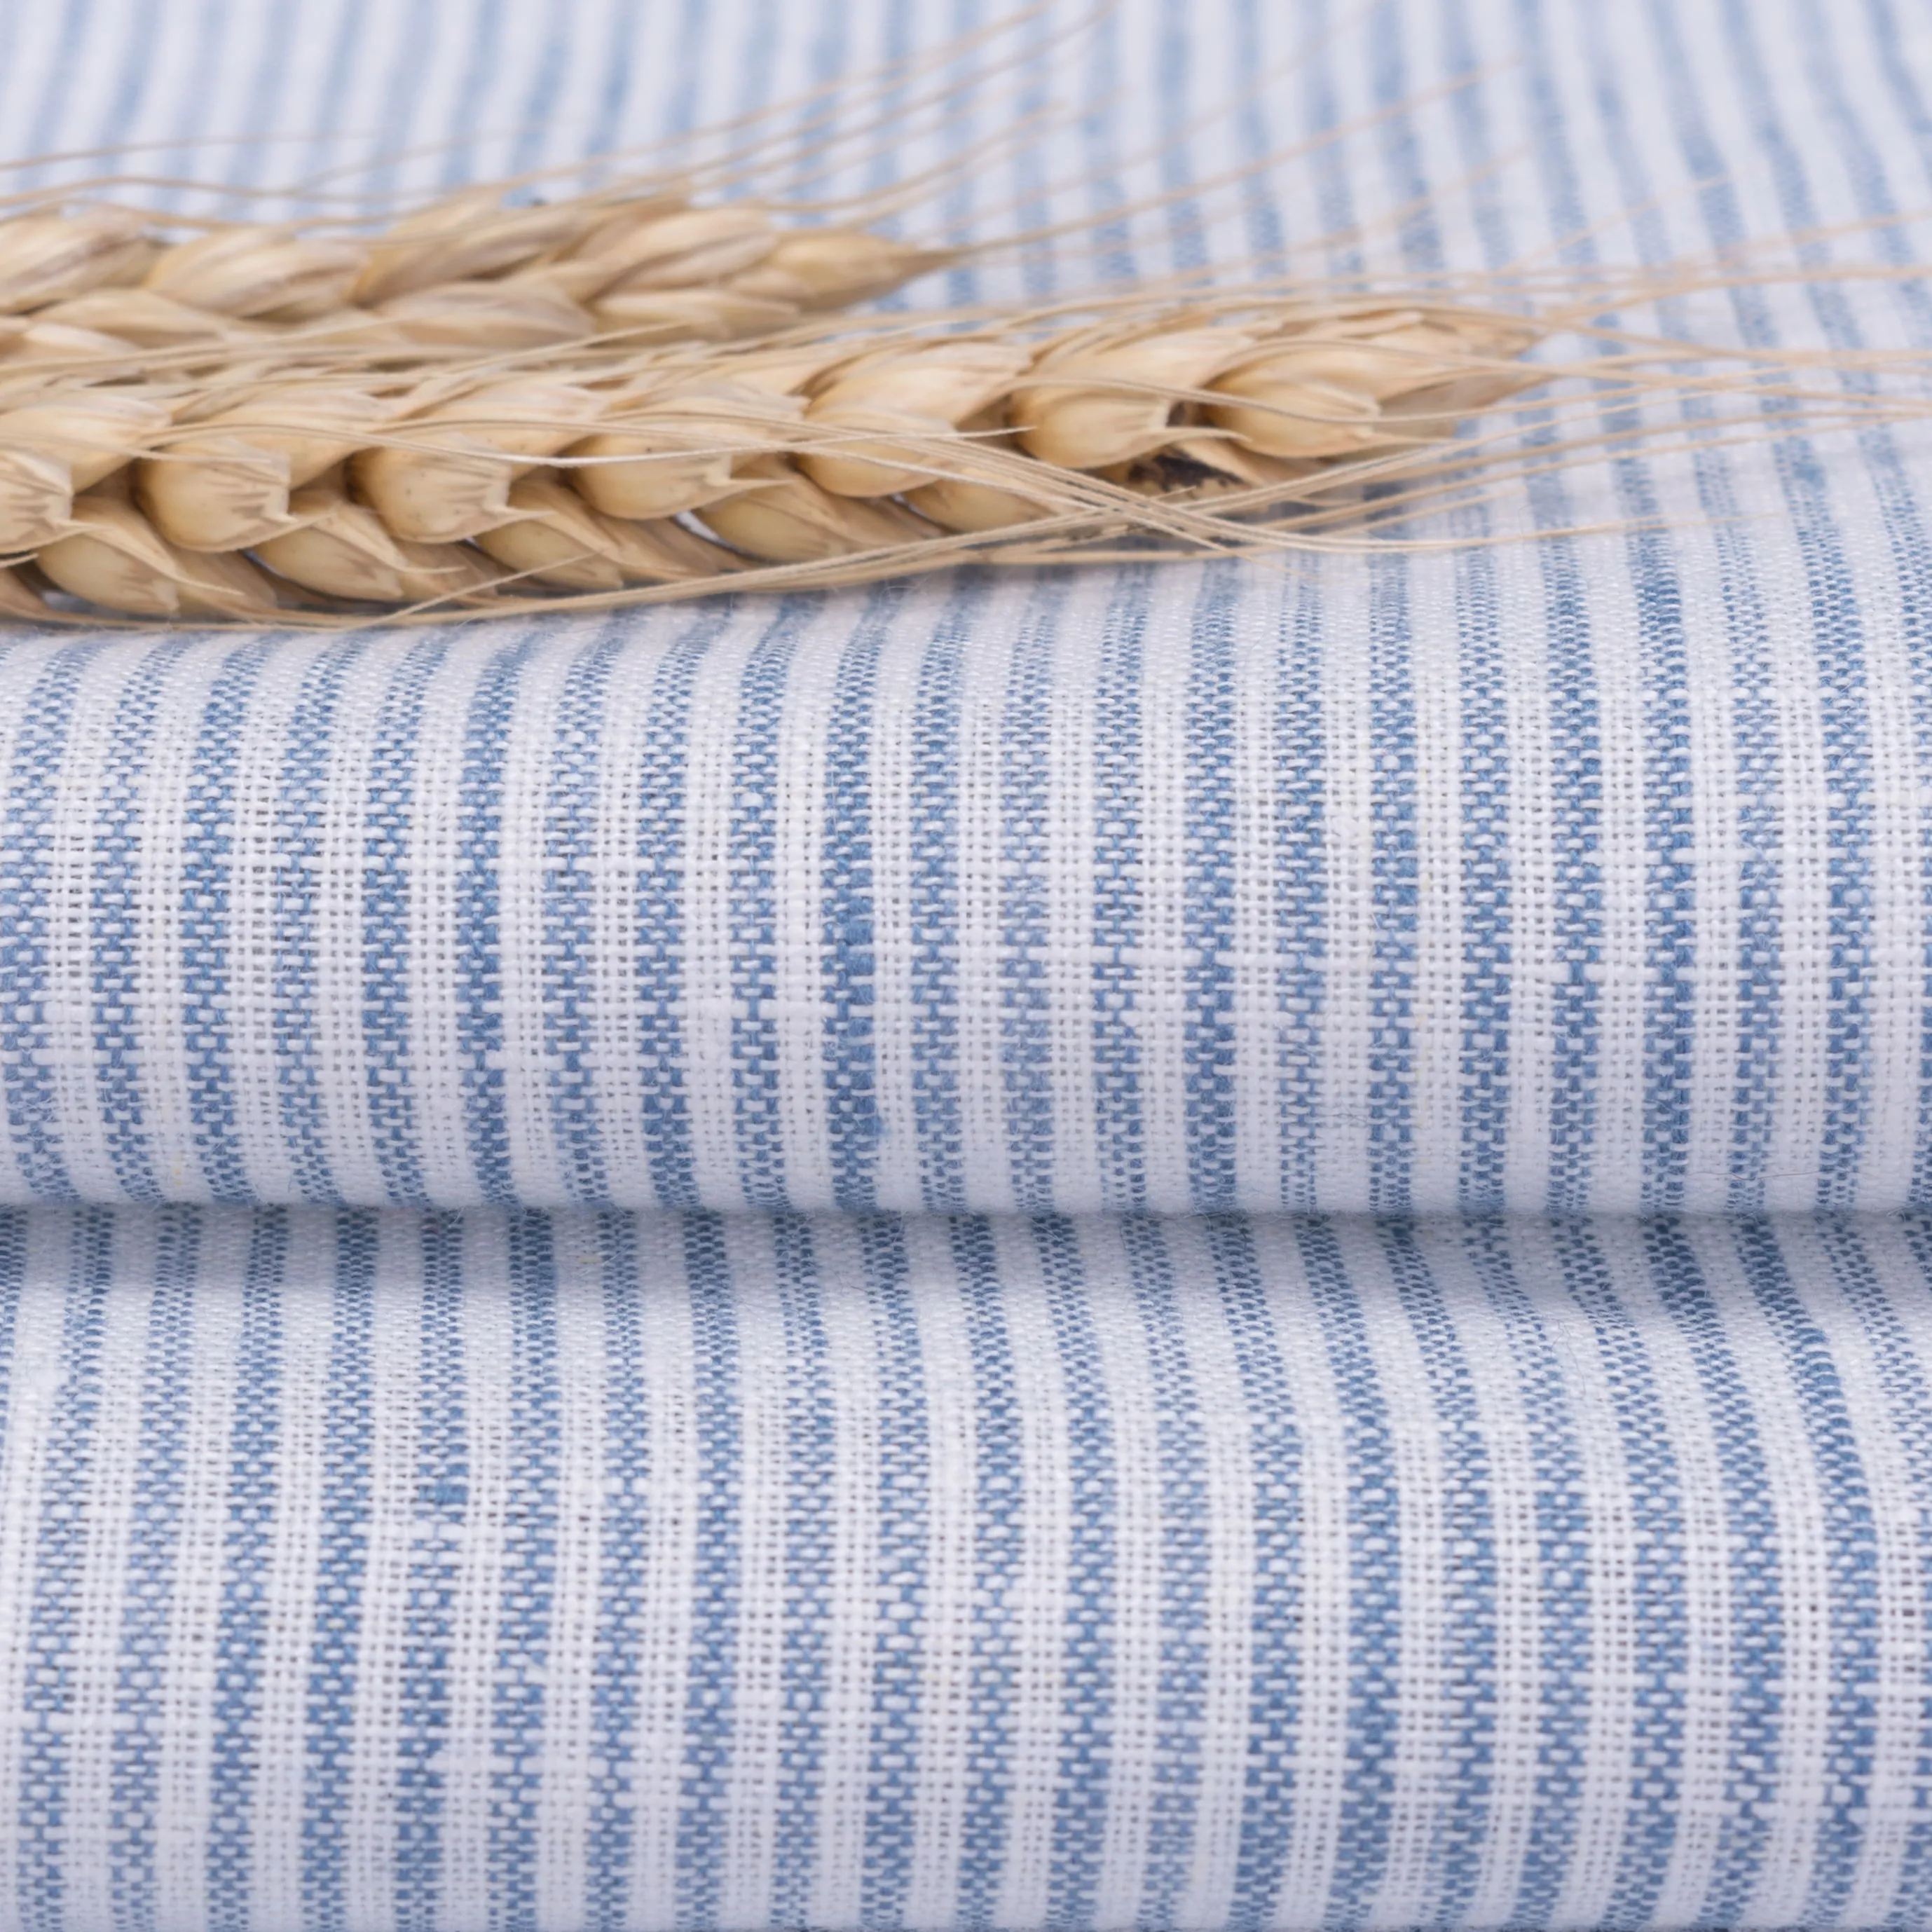 2716 pure French Linen Stripes fabric Wholesale, Yarn Dyed Linen Stripe fabric for linen pants Wholesale Manufacturers